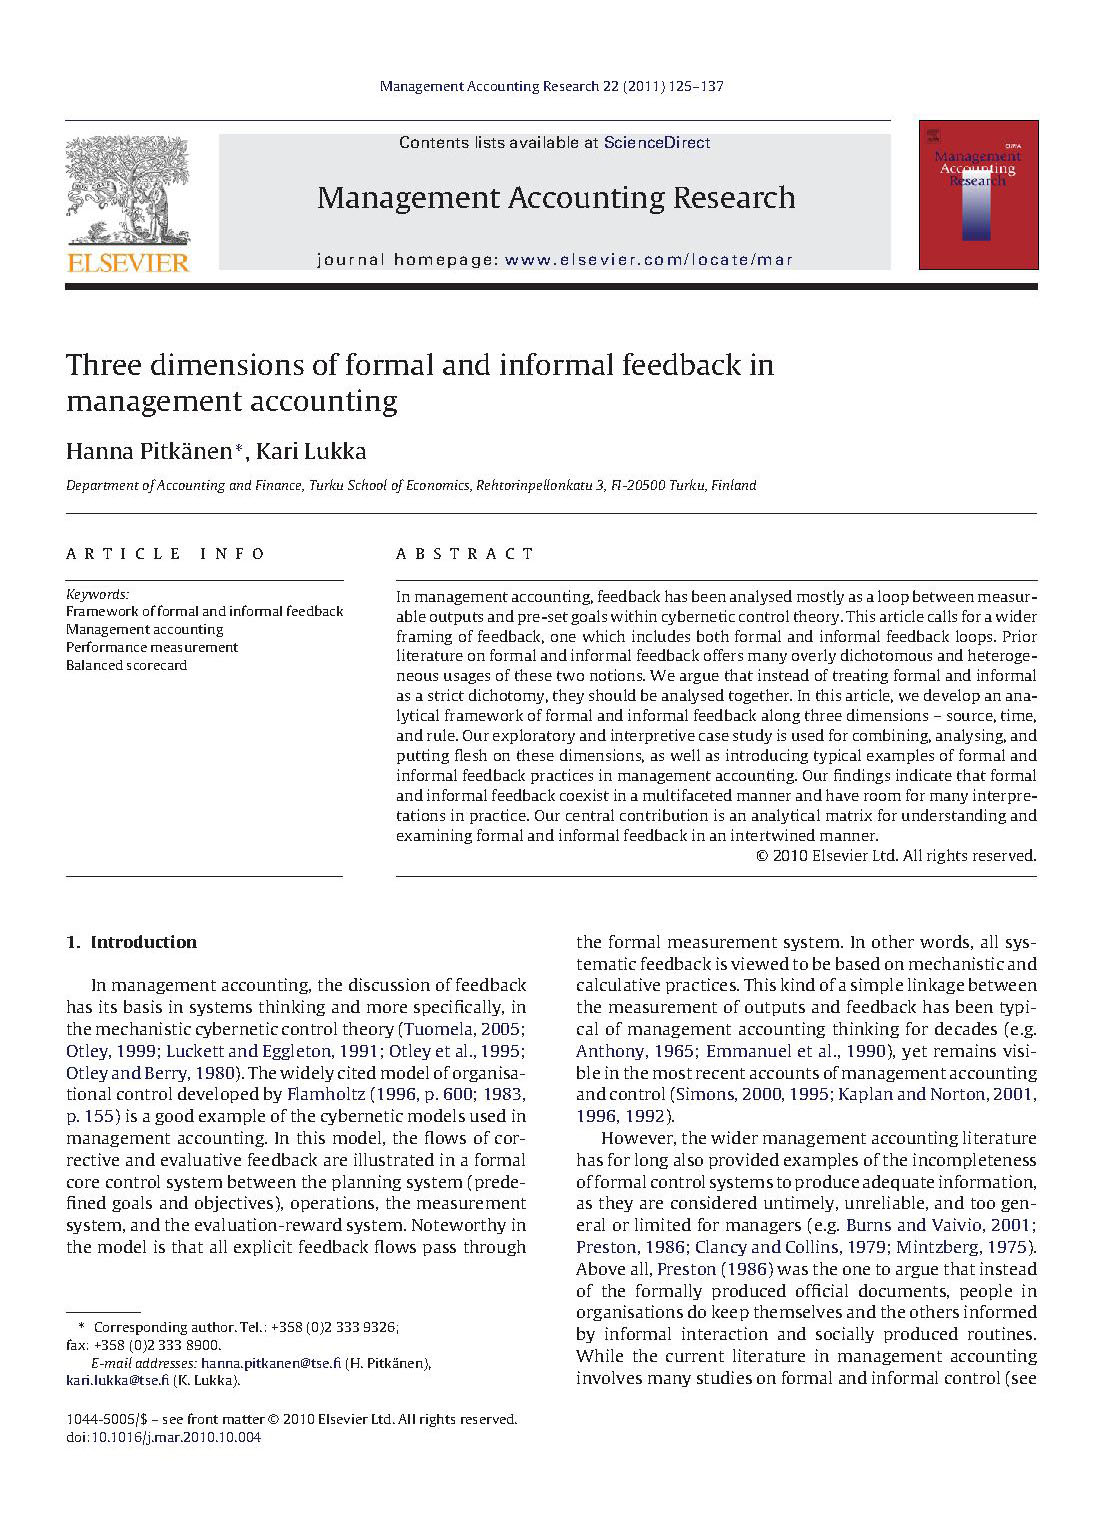 Three dimensions of formal and informal feedback in management accounting